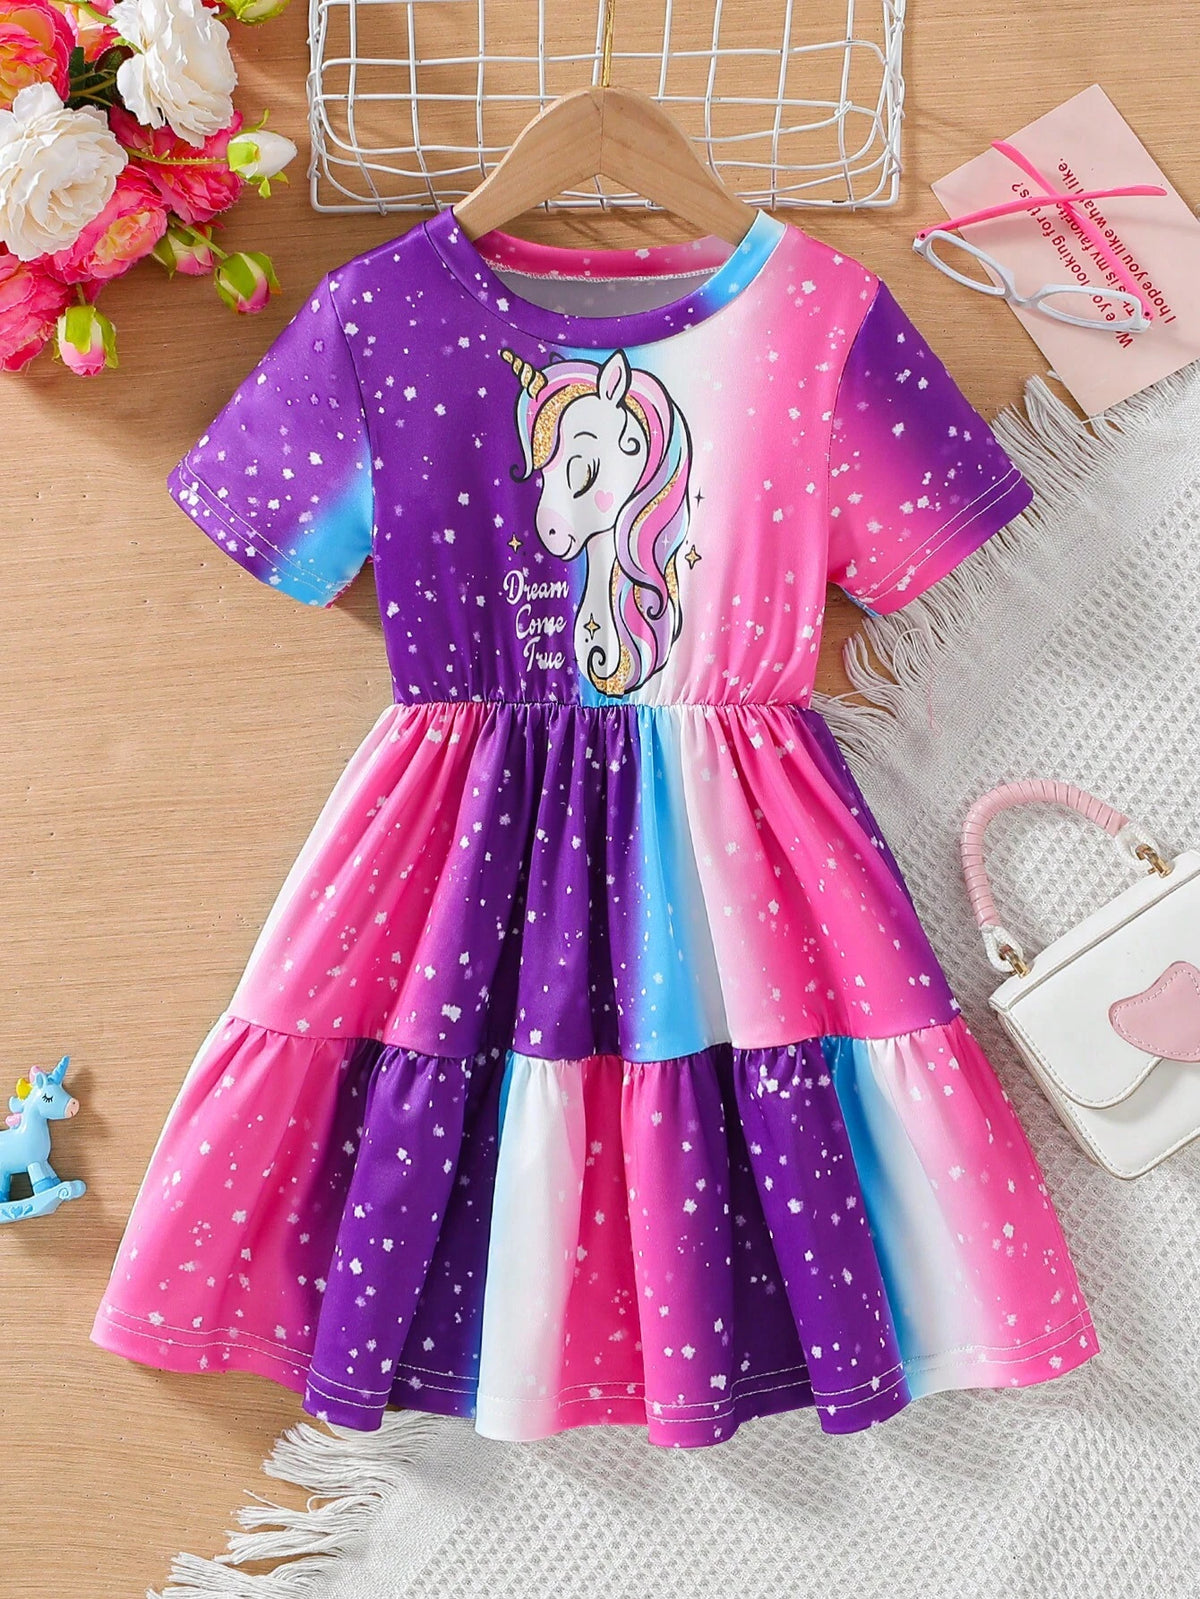 Toddler Girls Lovely Rainbow Unicorn Printed Short Sleeve Dress With Round Neck For Summer